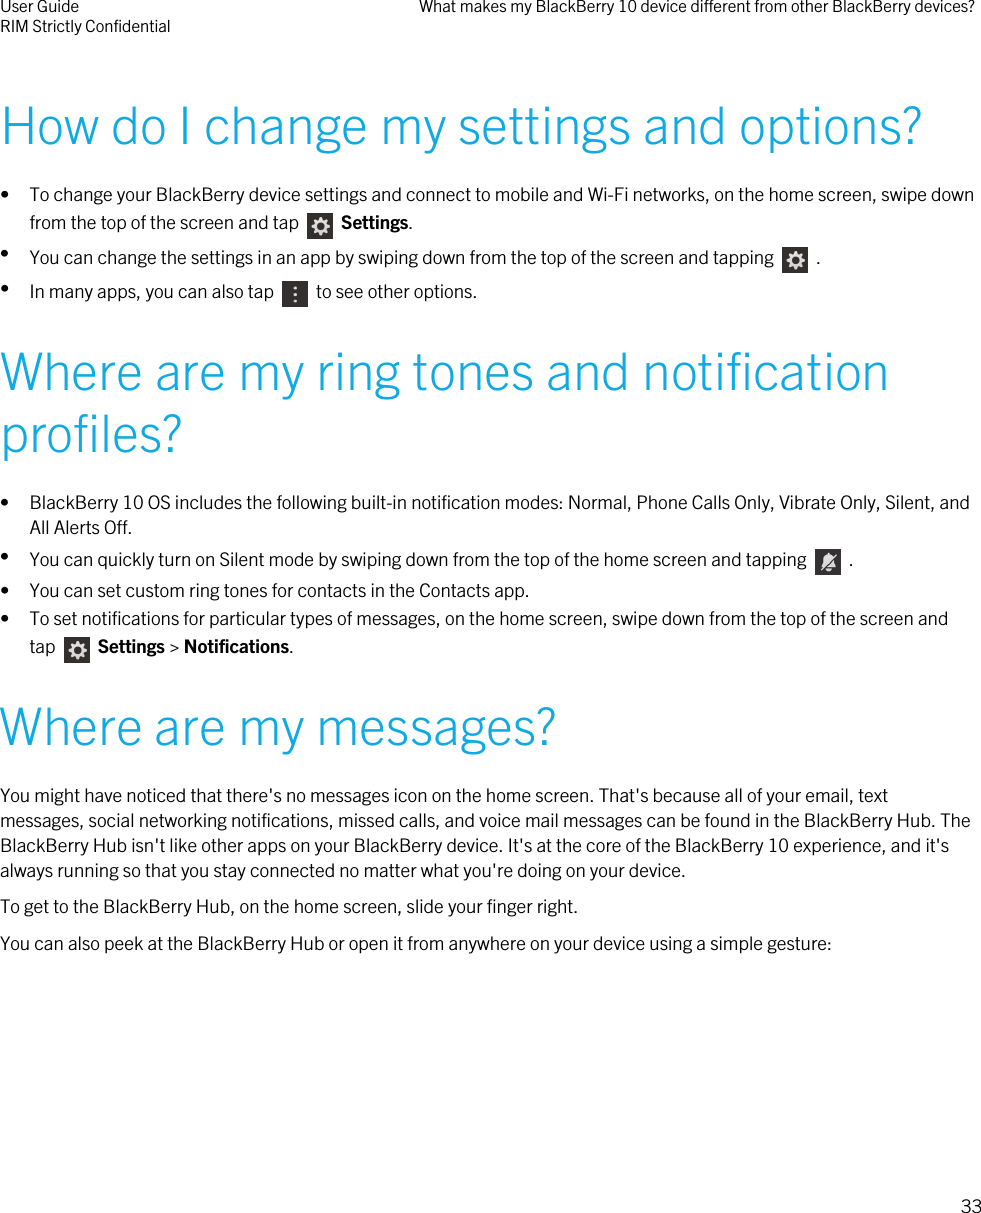 How do I change my settings and options?• To change your BlackBerry device settings and connect to mobile and Wi-Fi networks, on the home screen, swipe downfrom the top of the screen and tap     Settings.•You can change the settings in an app by swiping down from the top of the screen and tapping    .•In many apps, you can also tap    to see other options.Where are my ring tones and notificationprofiles?• BlackBerry 10 OS includes the following built-in notification modes: Normal, Phone Calls Only, Vibrate Only, Silent, andAll Alerts Off.•You can quickly turn on Silent mode by swiping down from the top of the home screen and tapping    .• You can set custom ring tones for contacts in the Contacts app.• To set notifications for particular types of messages, on the home screen, swipe down from the top of the screen andtap   Settings &gt; Notifications.Where are my messages?You might have noticed that there&apos;s no messages icon on the home screen. That&apos;s because all of your email, textmessages, social networking notifications, missed calls, and voice mail messages can be found in the BlackBerry Hub. TheBlackBerry Hub isn&apos;t like other apps on your BlackBerry device. It&apos;s at the core of the BlackBerry 10 experience, and it&apos;salways running so that you stay connected no matter what you&apos;re doing on your device.To get to the BlackBerry Hub, on the home screen, slide your finger right.You can also peek at the BlackBerry Hub or open it from anywhere on your device using a simple gesture:User GuideRIM Strictly Confidential What makes my BlackBerry 10 device different from other BlackBerry devices?33